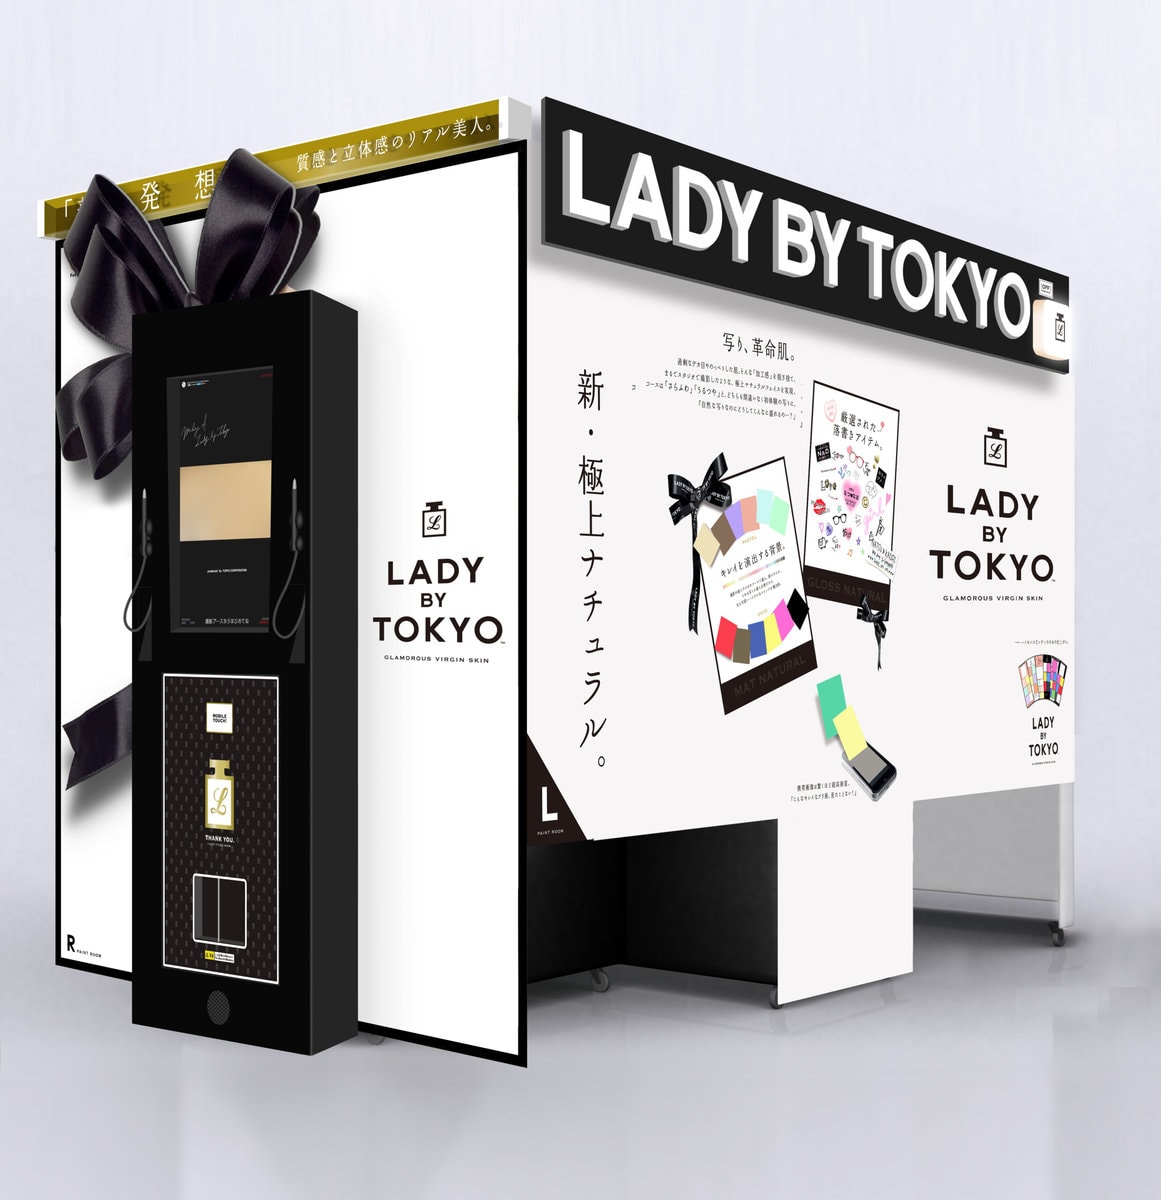 『LADY BY TOKYO』